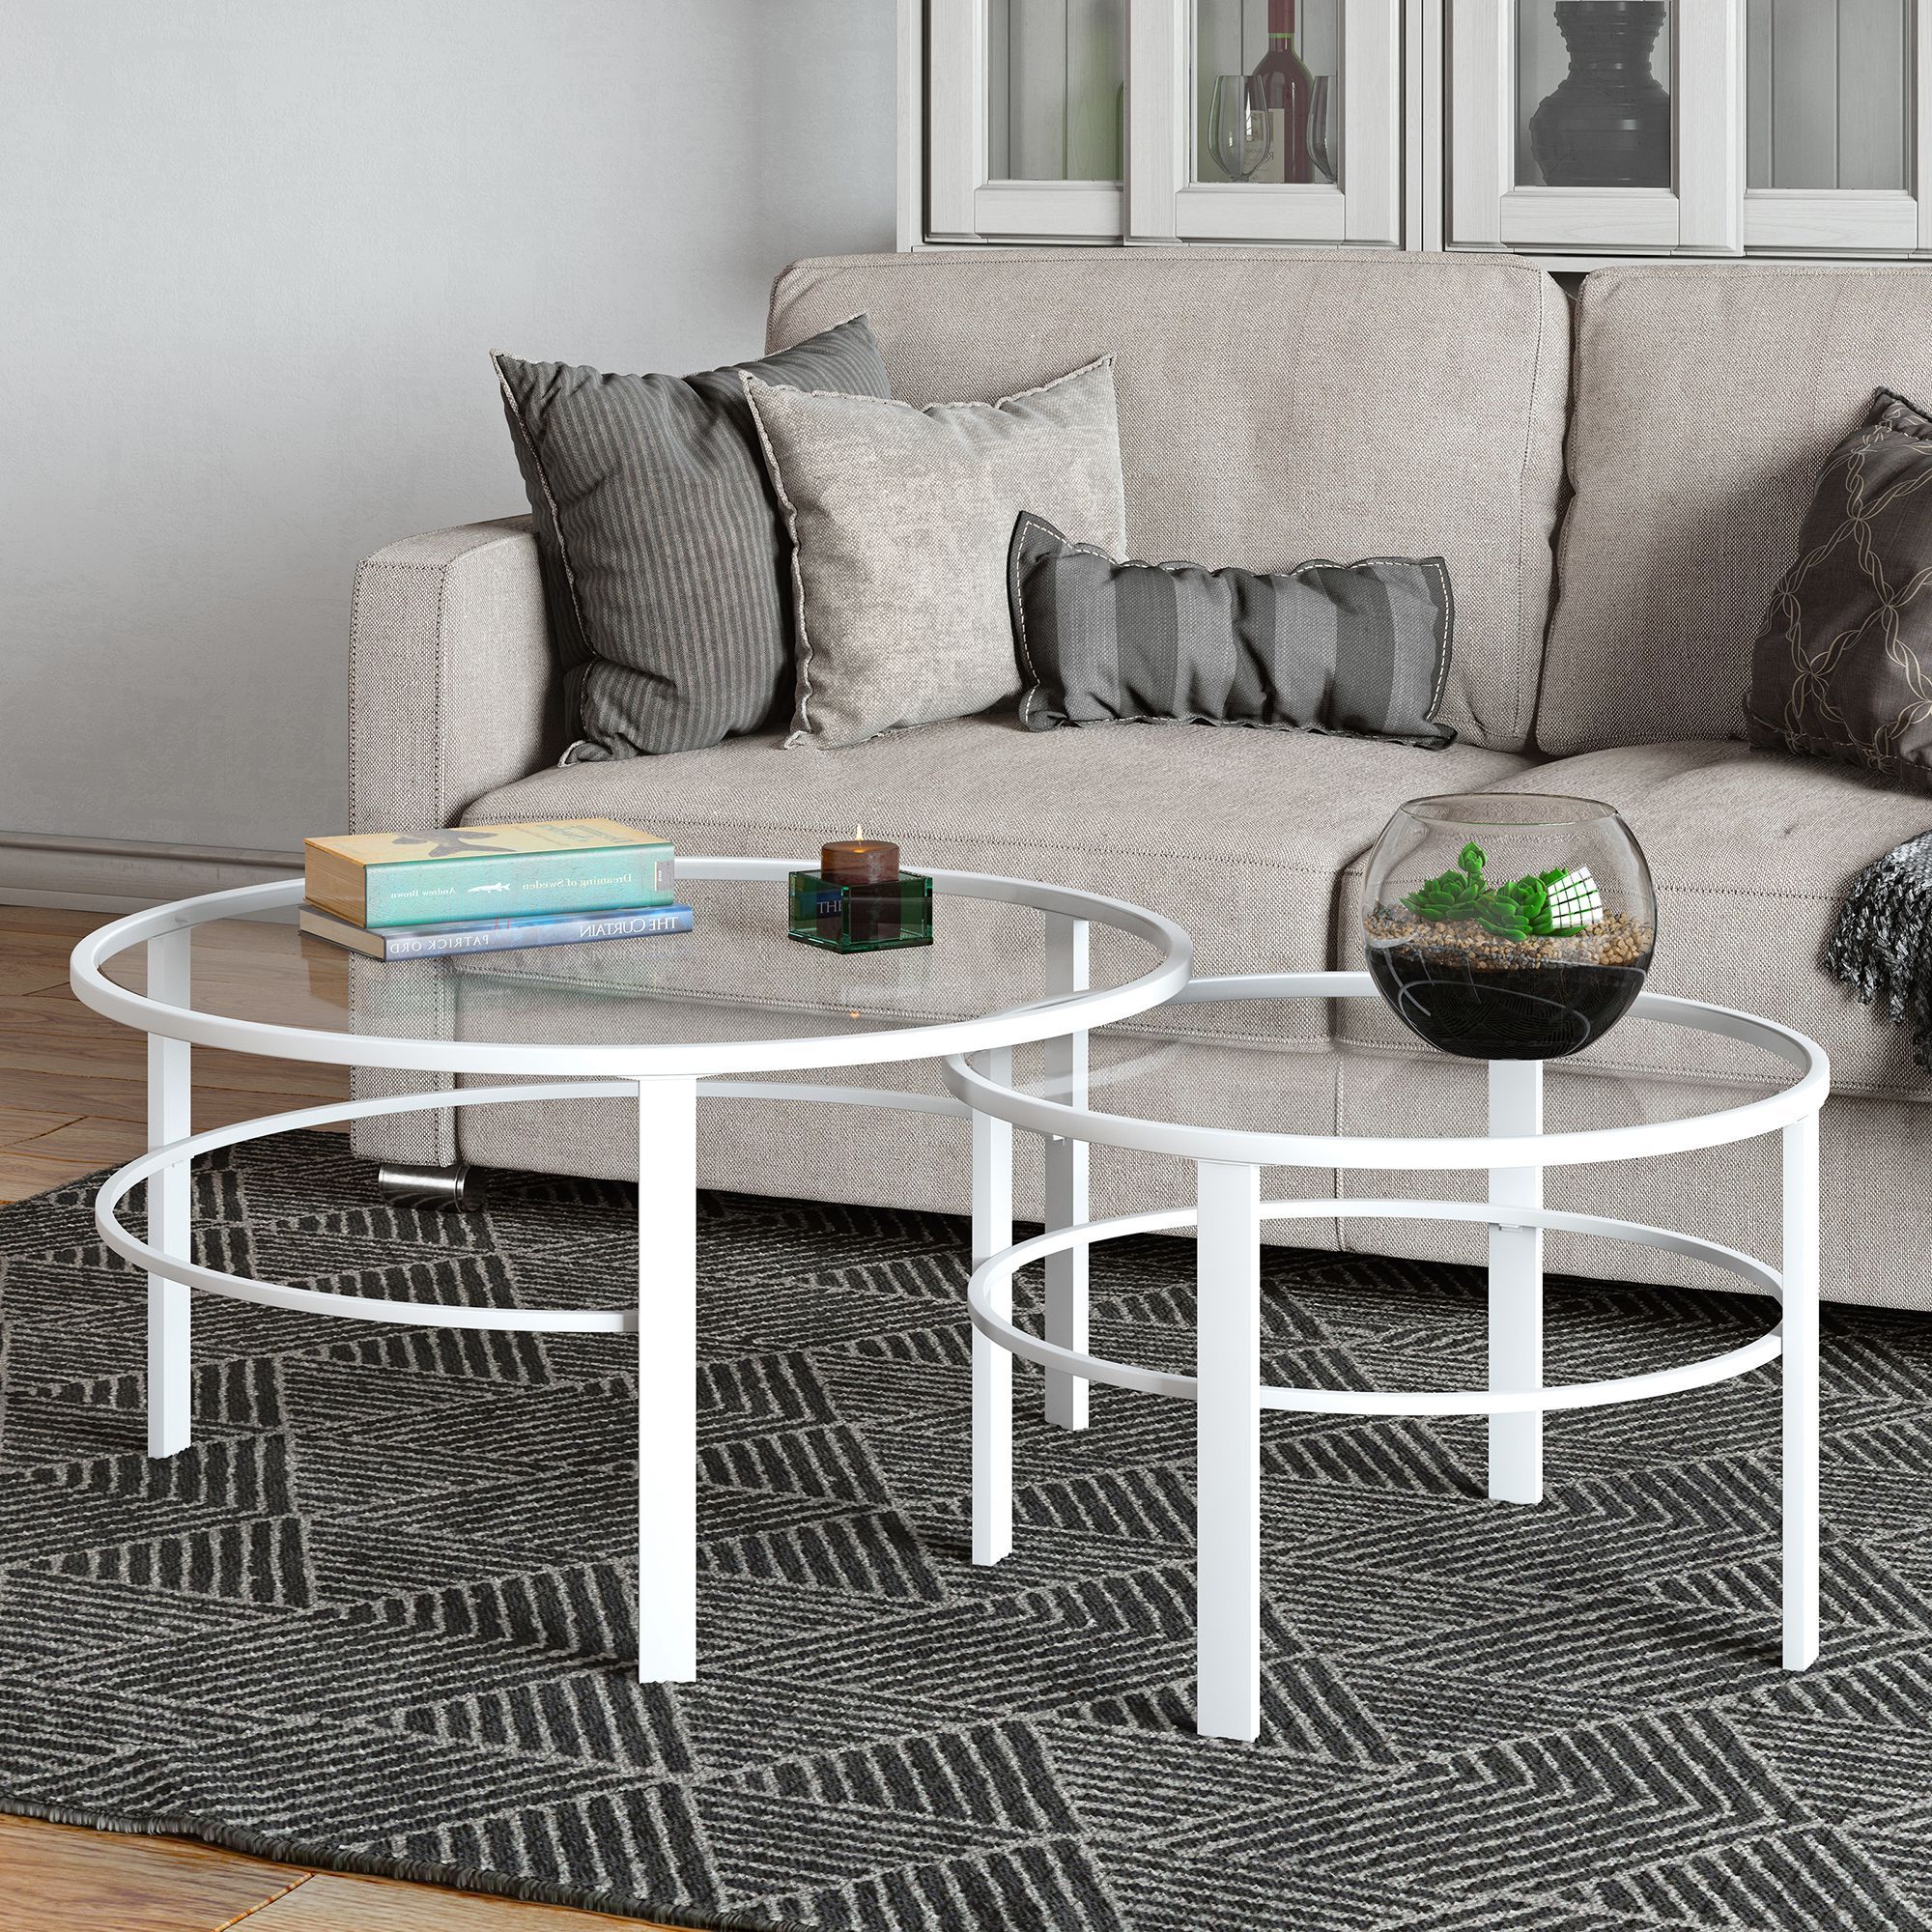 2 Piece Round Coffee Tables Set Inside Preferred Evelyn&zoe Contemporary Nesting Coffee Table Set With Glass Top (View 7 of 10)